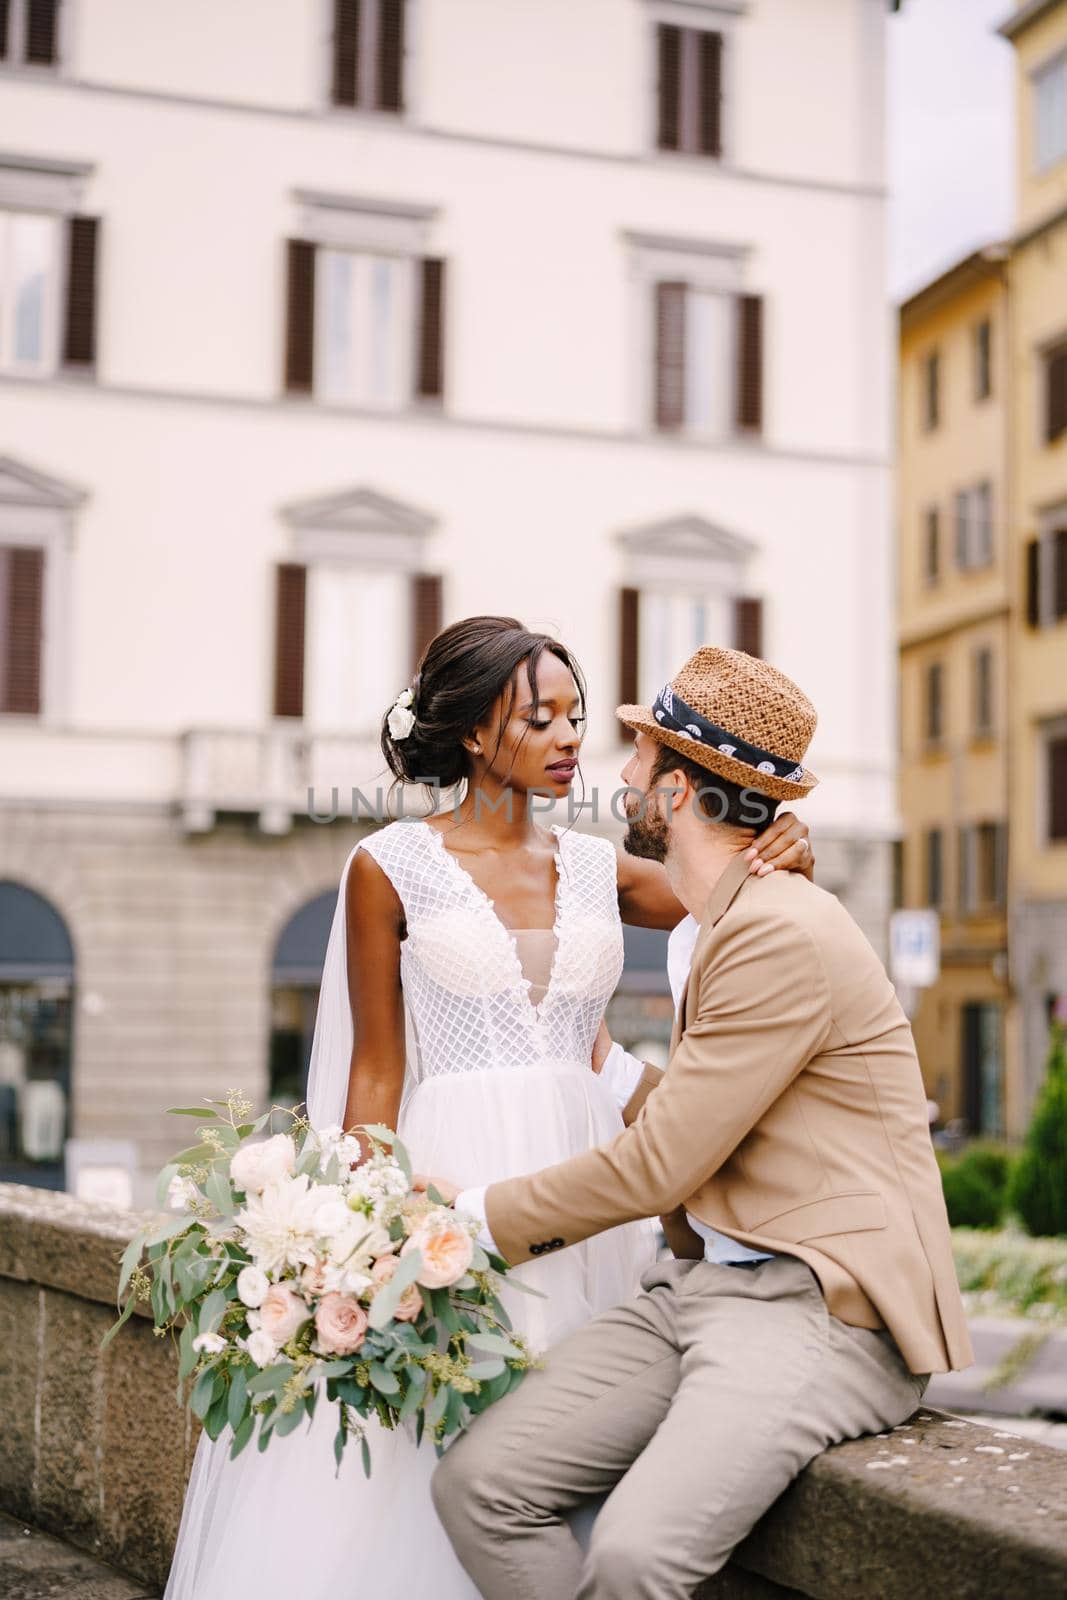 African-American bride in a white dress with a long veil and bouquet, and Caucasian groom in a sand jacket and straw hat. Interracial wedding couple. Wedding in Florence, Italy.